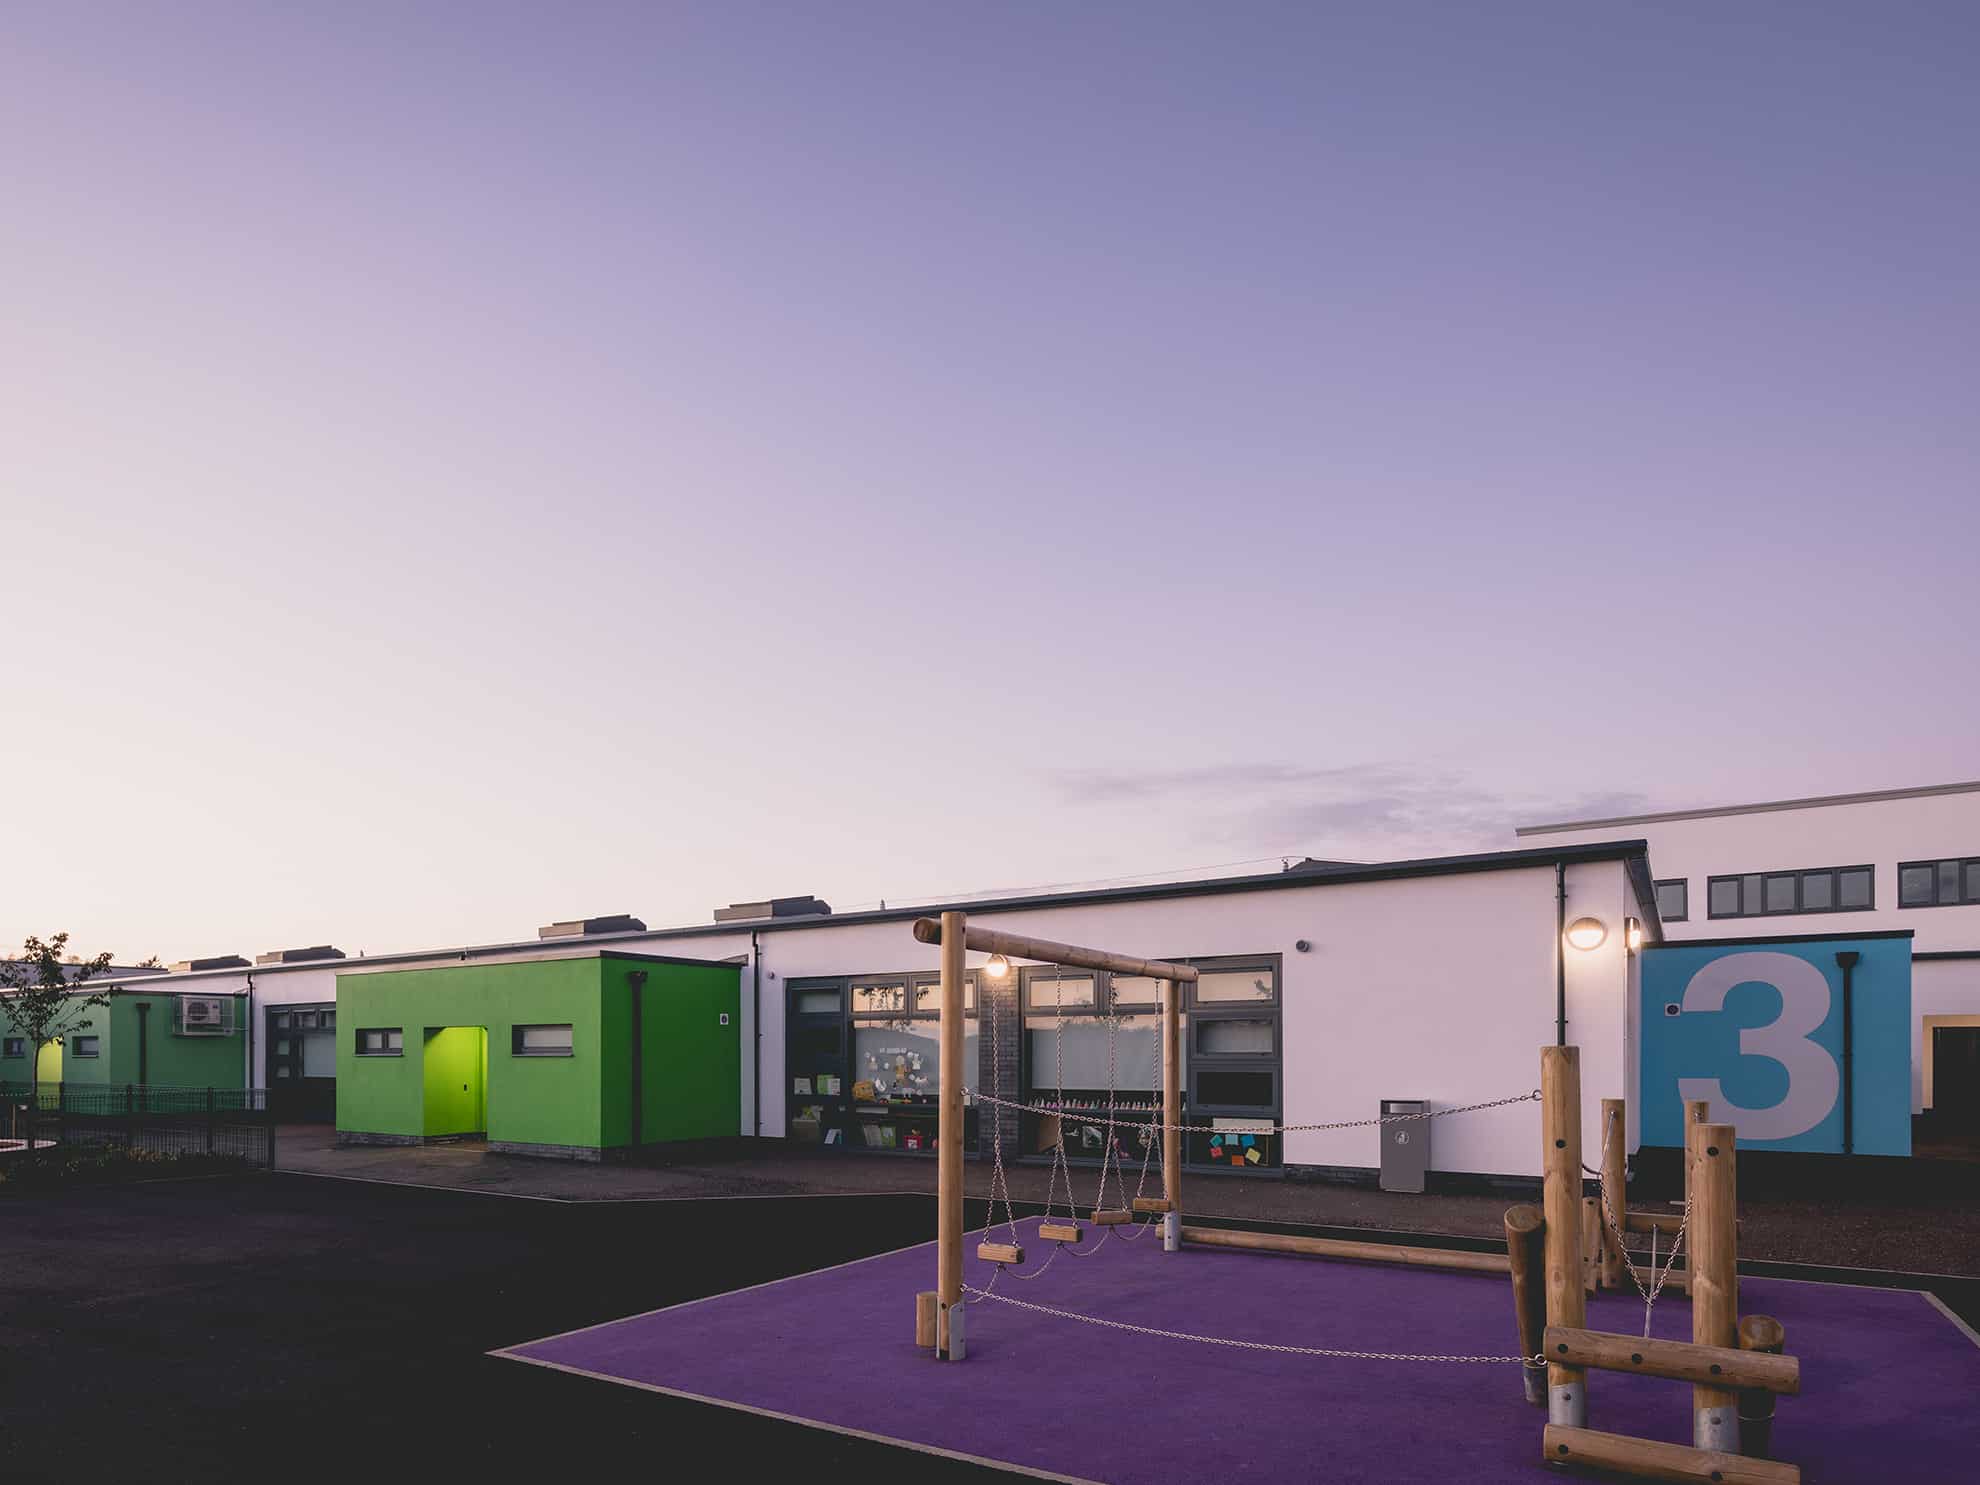 Omagh Integrated Primary and Nursery